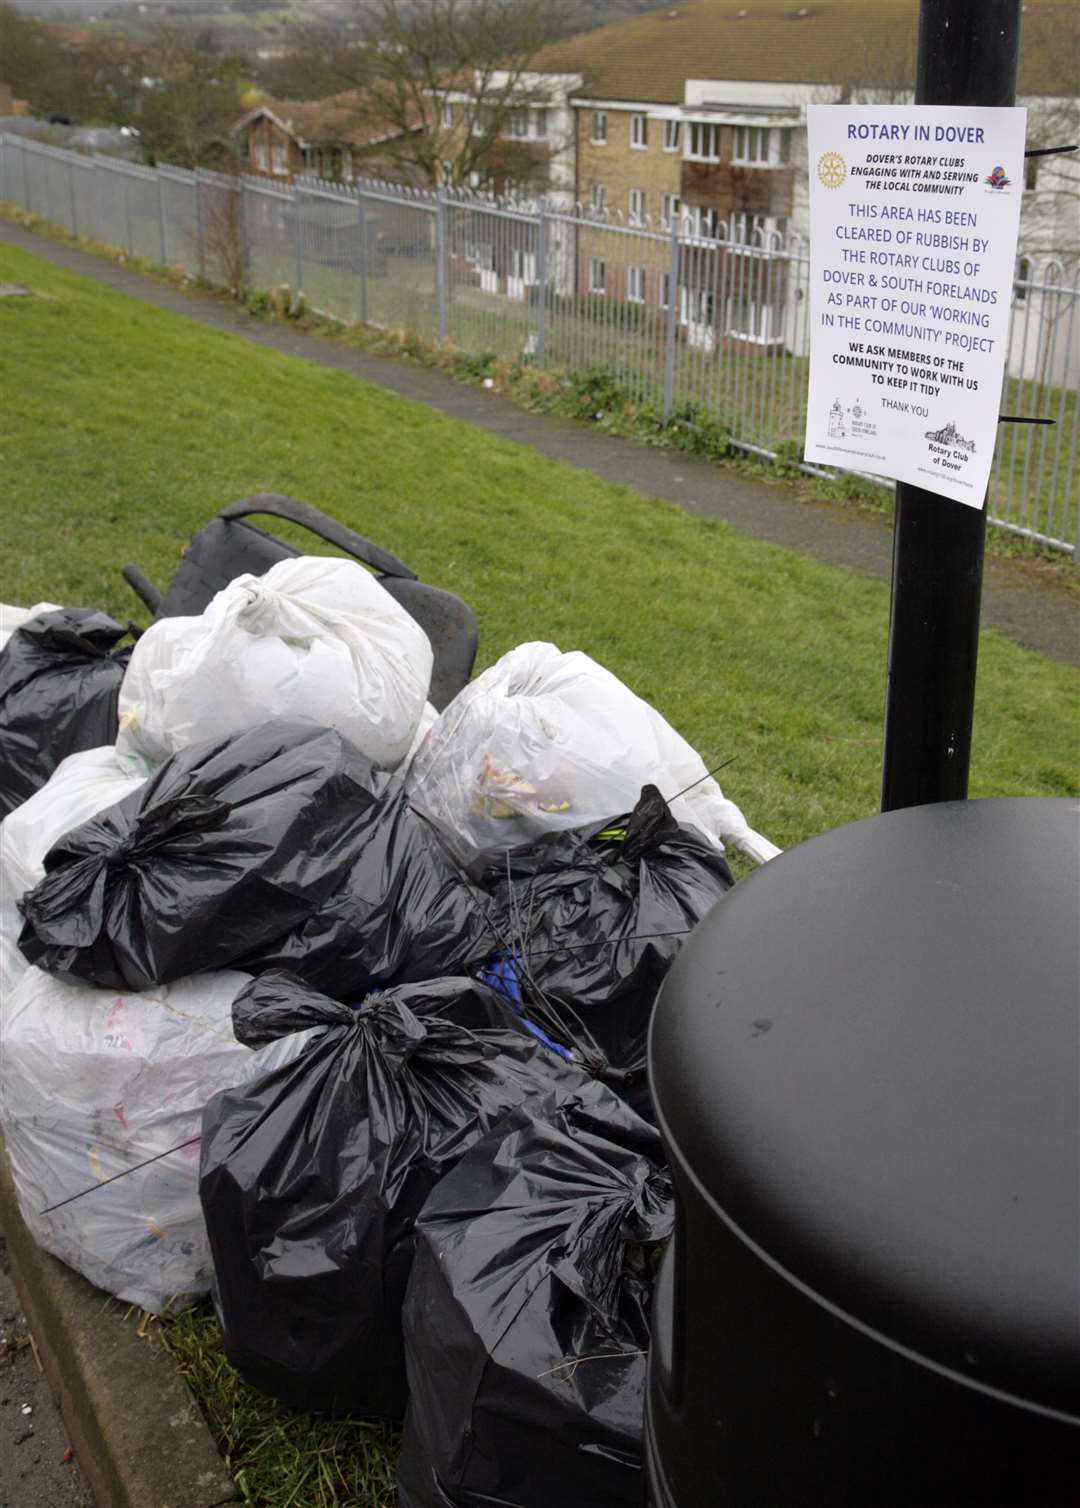 Rubbish clear up by Rotary Club of Dover